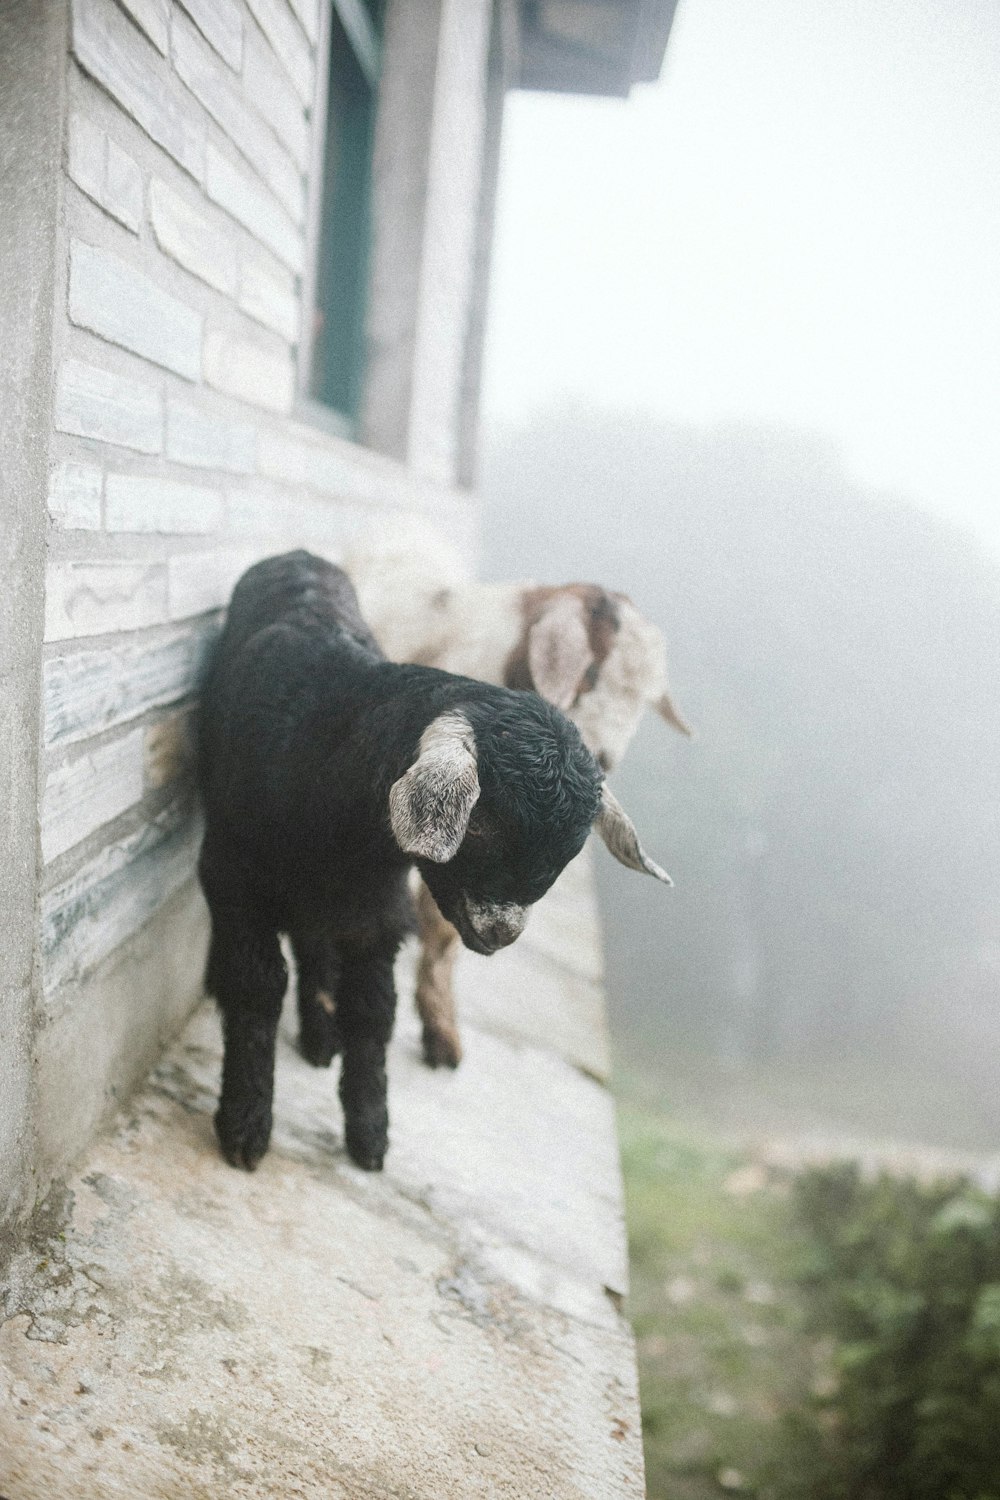 two white, brown, and black goat kids during daytime